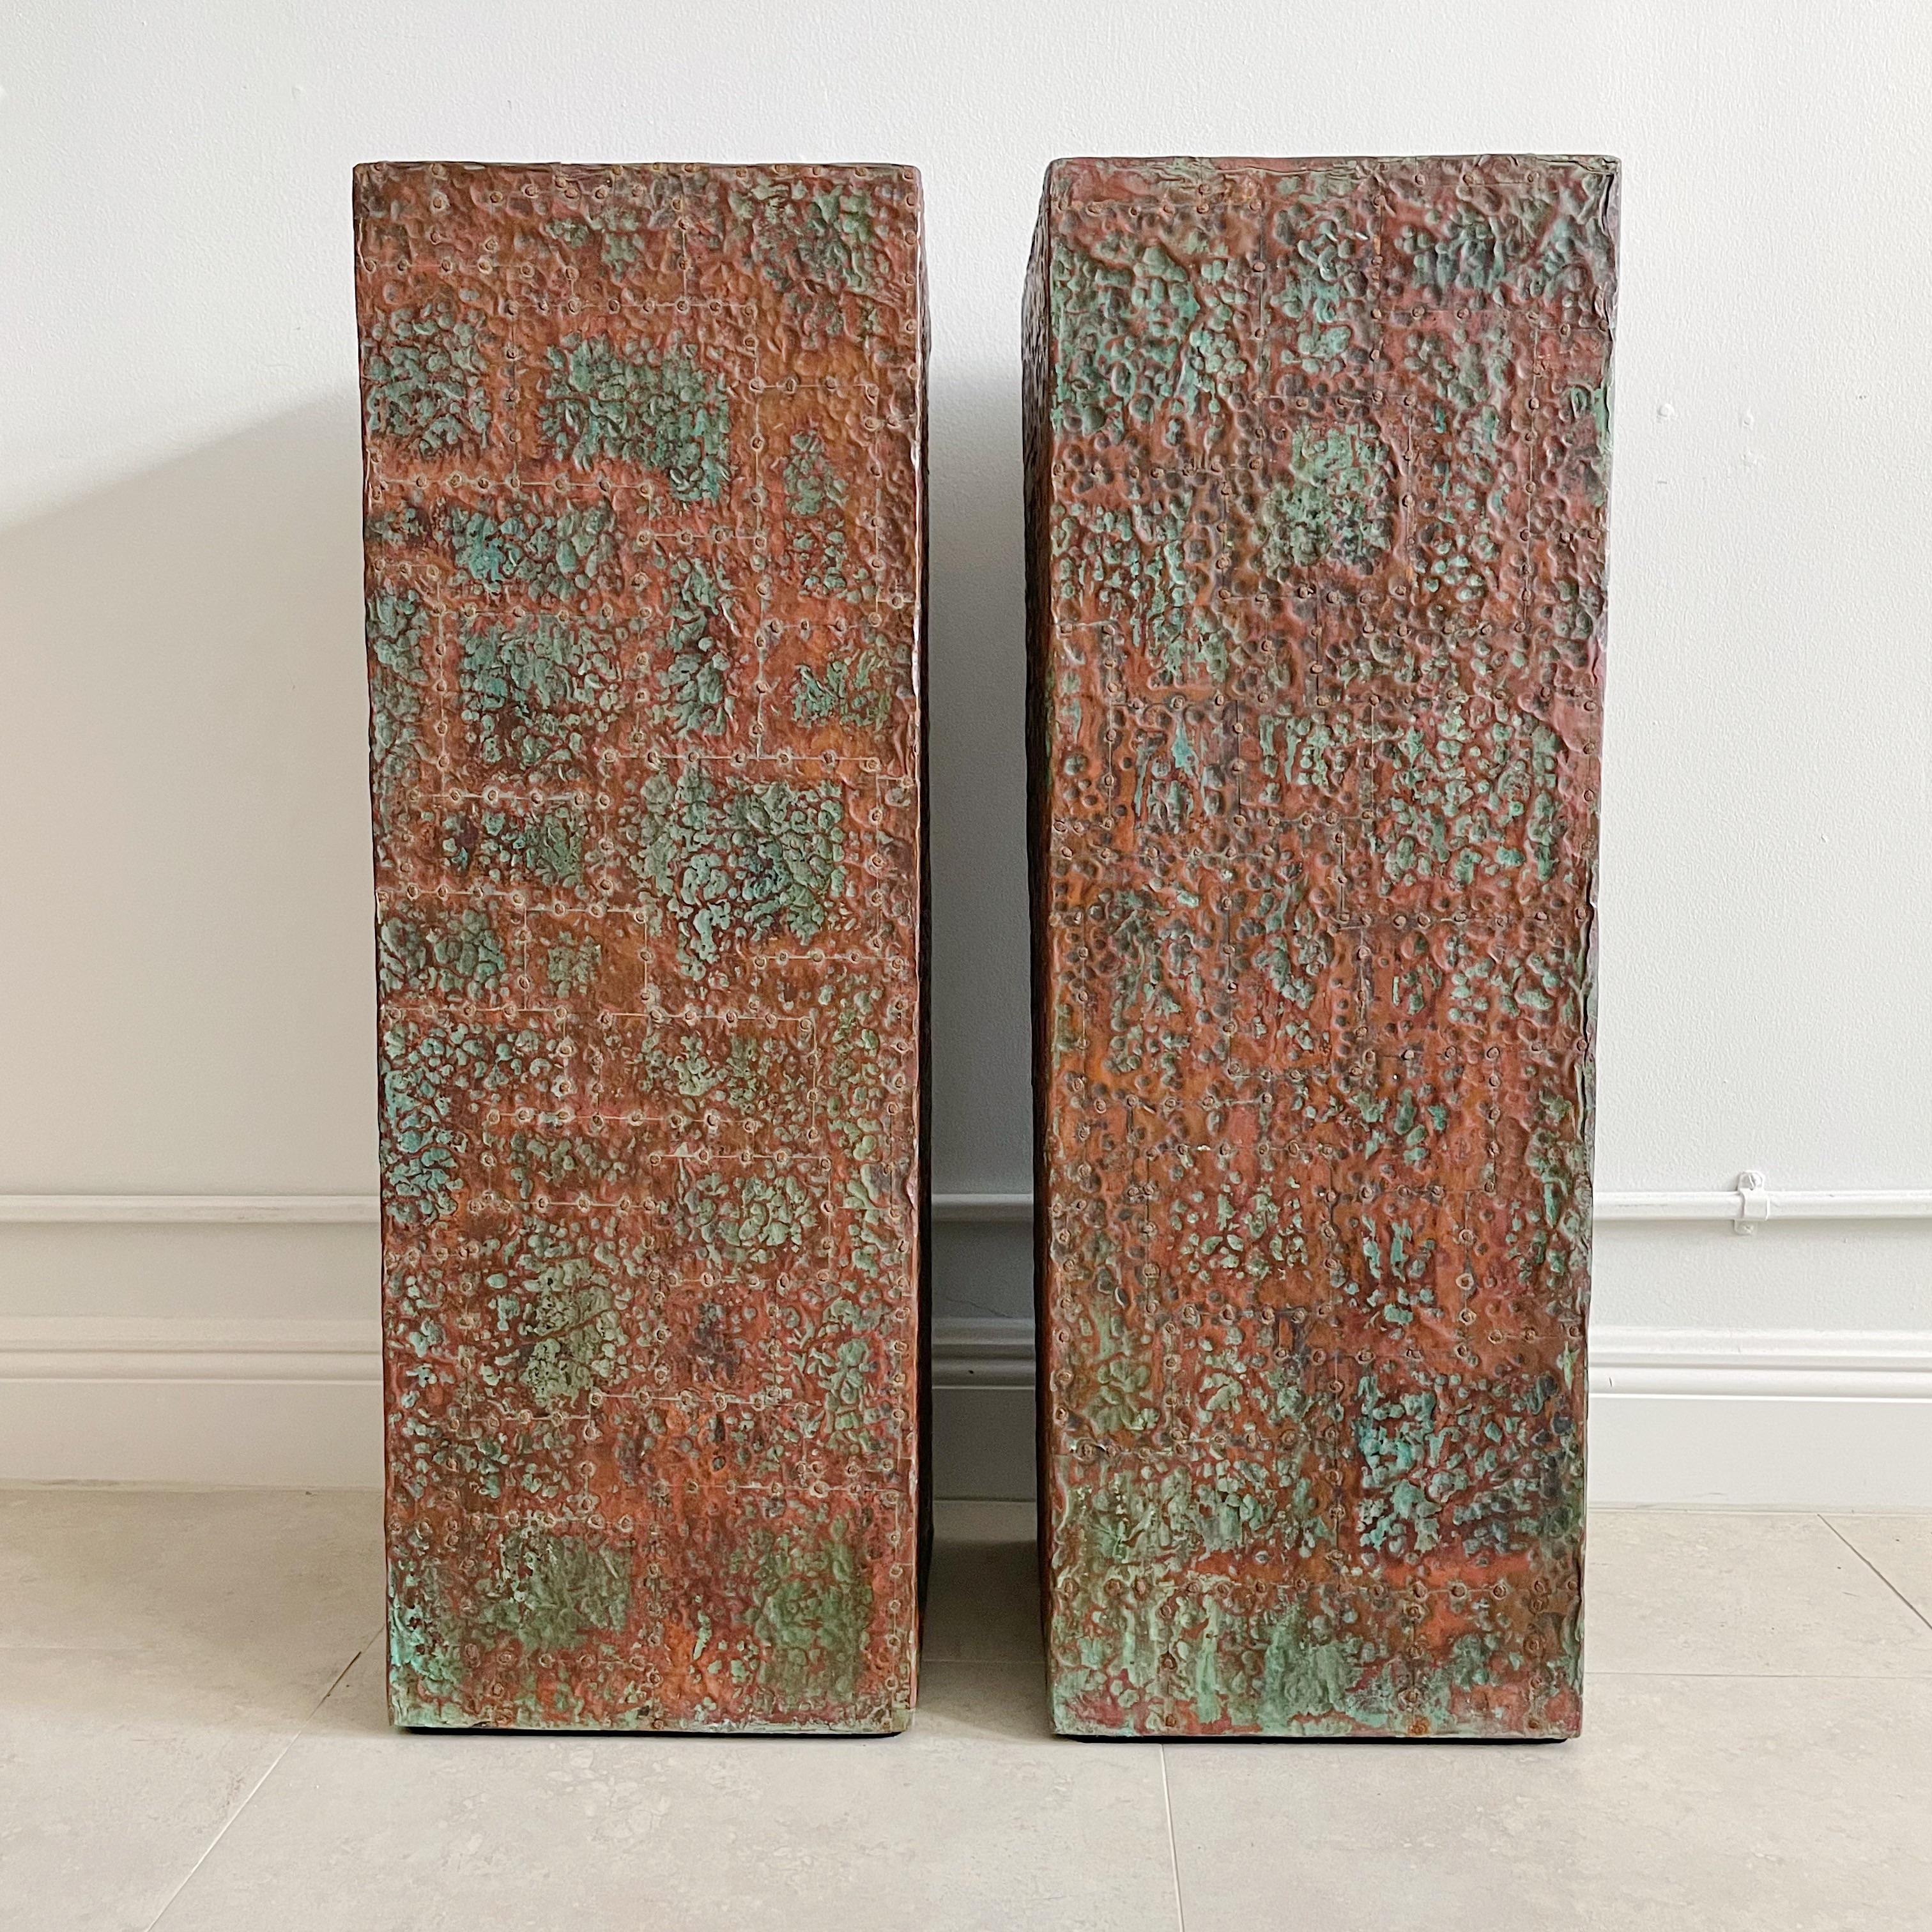 Custom wood pedestals in covered in hammered brutalist style copper. Square patchwork copper pieces with brass nailheads over wood.